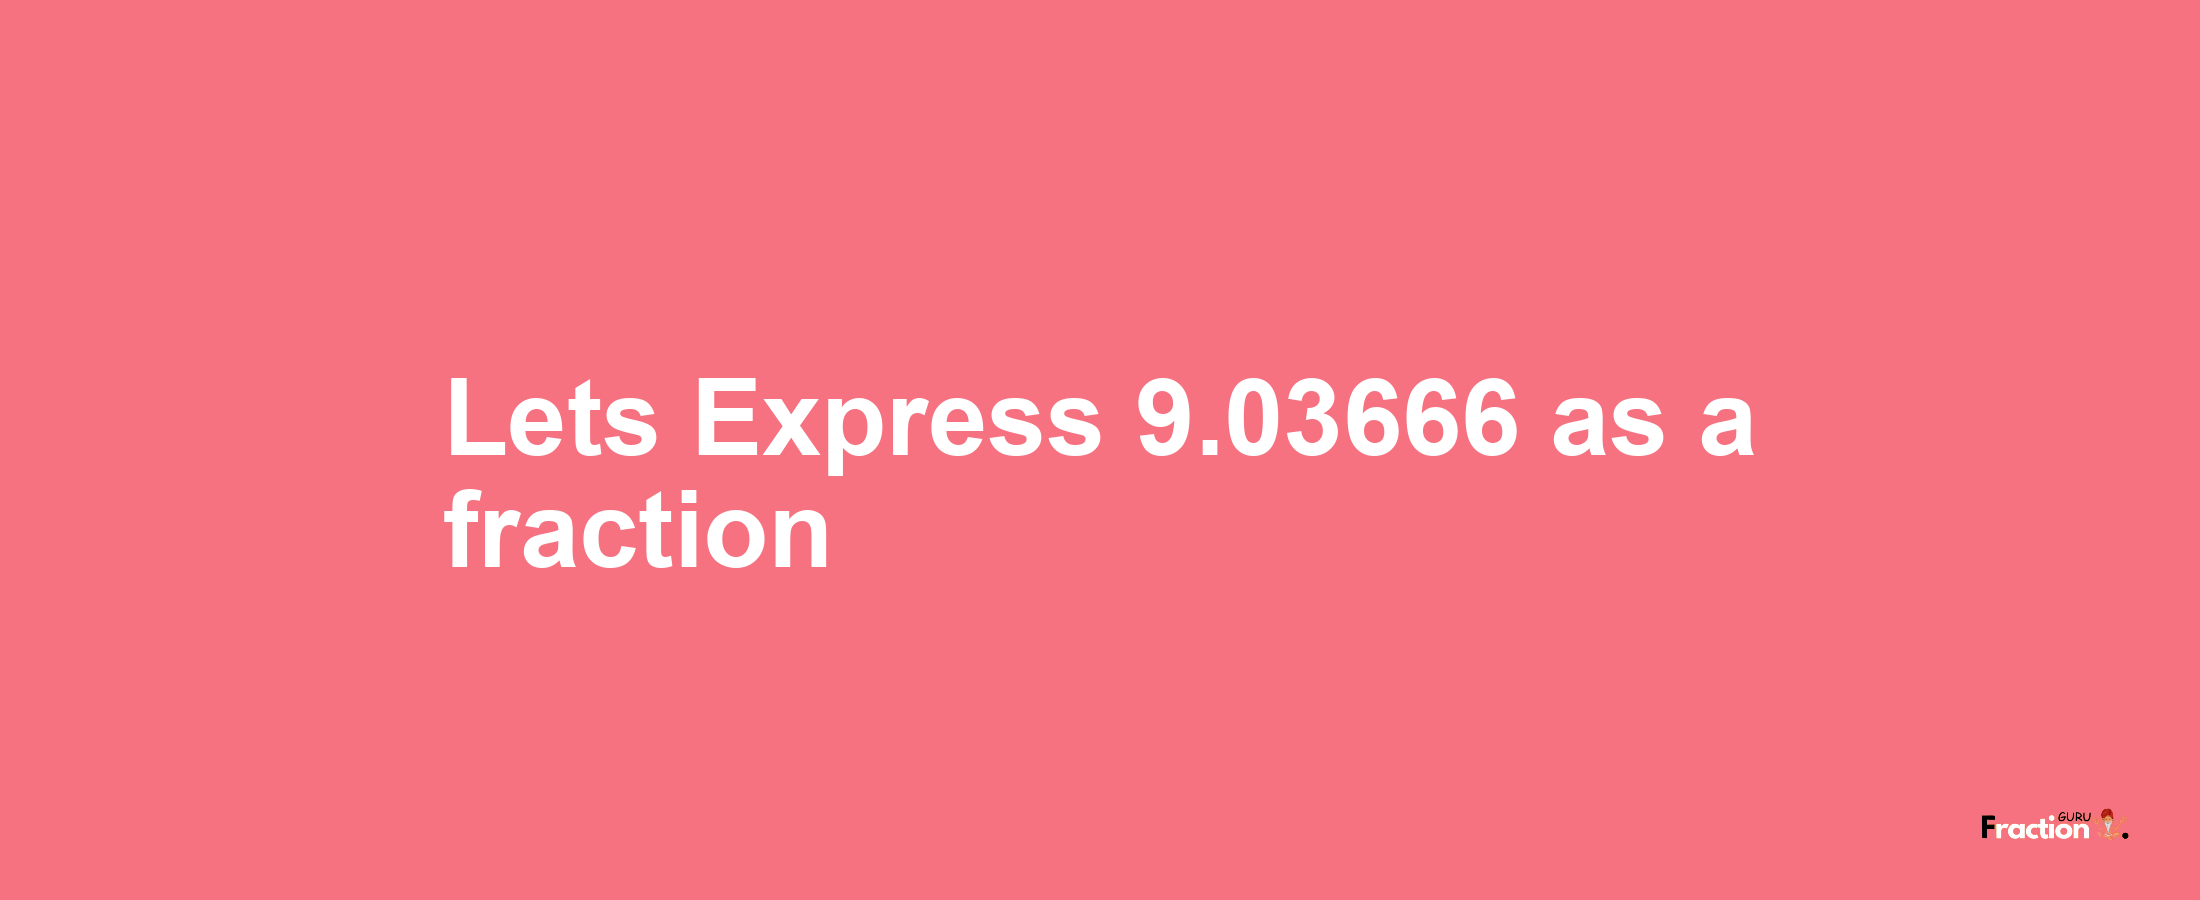 Lets Express 9.03666 as afraction